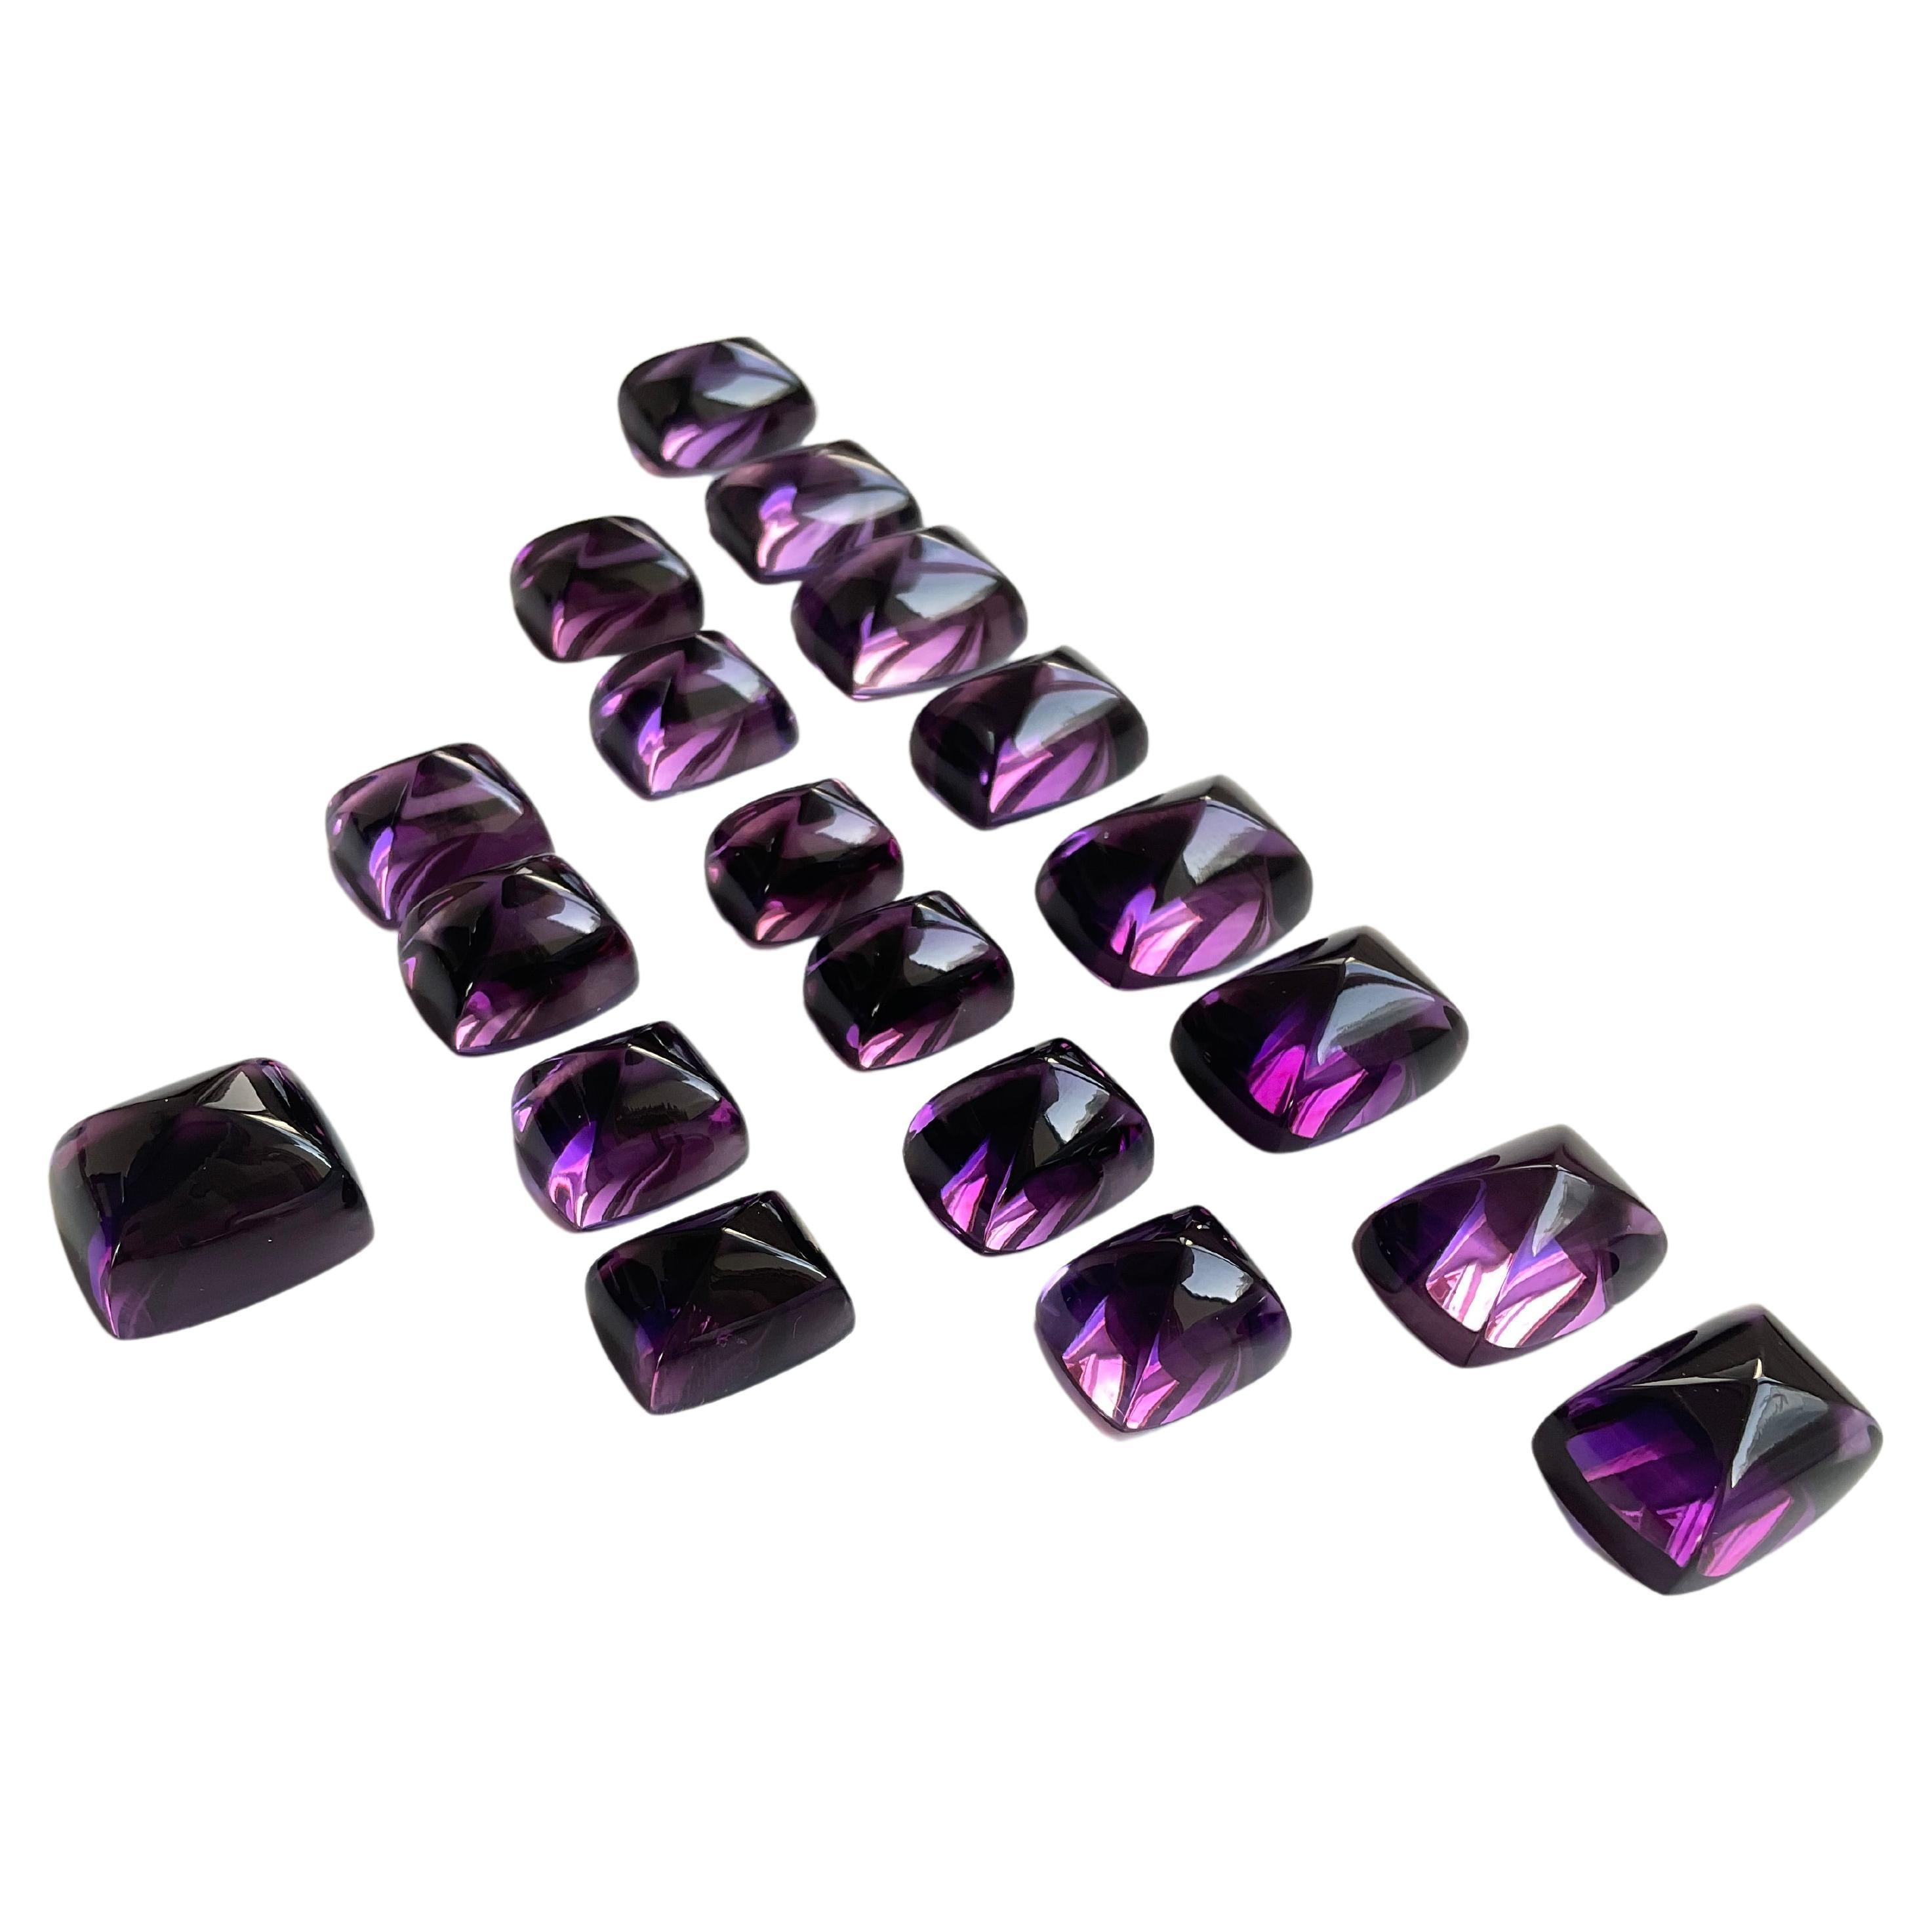 Weight: 586.90 Carats
Size: 21x15x12 To 15x11x11 MM
Pieces: 26
Drilled: No